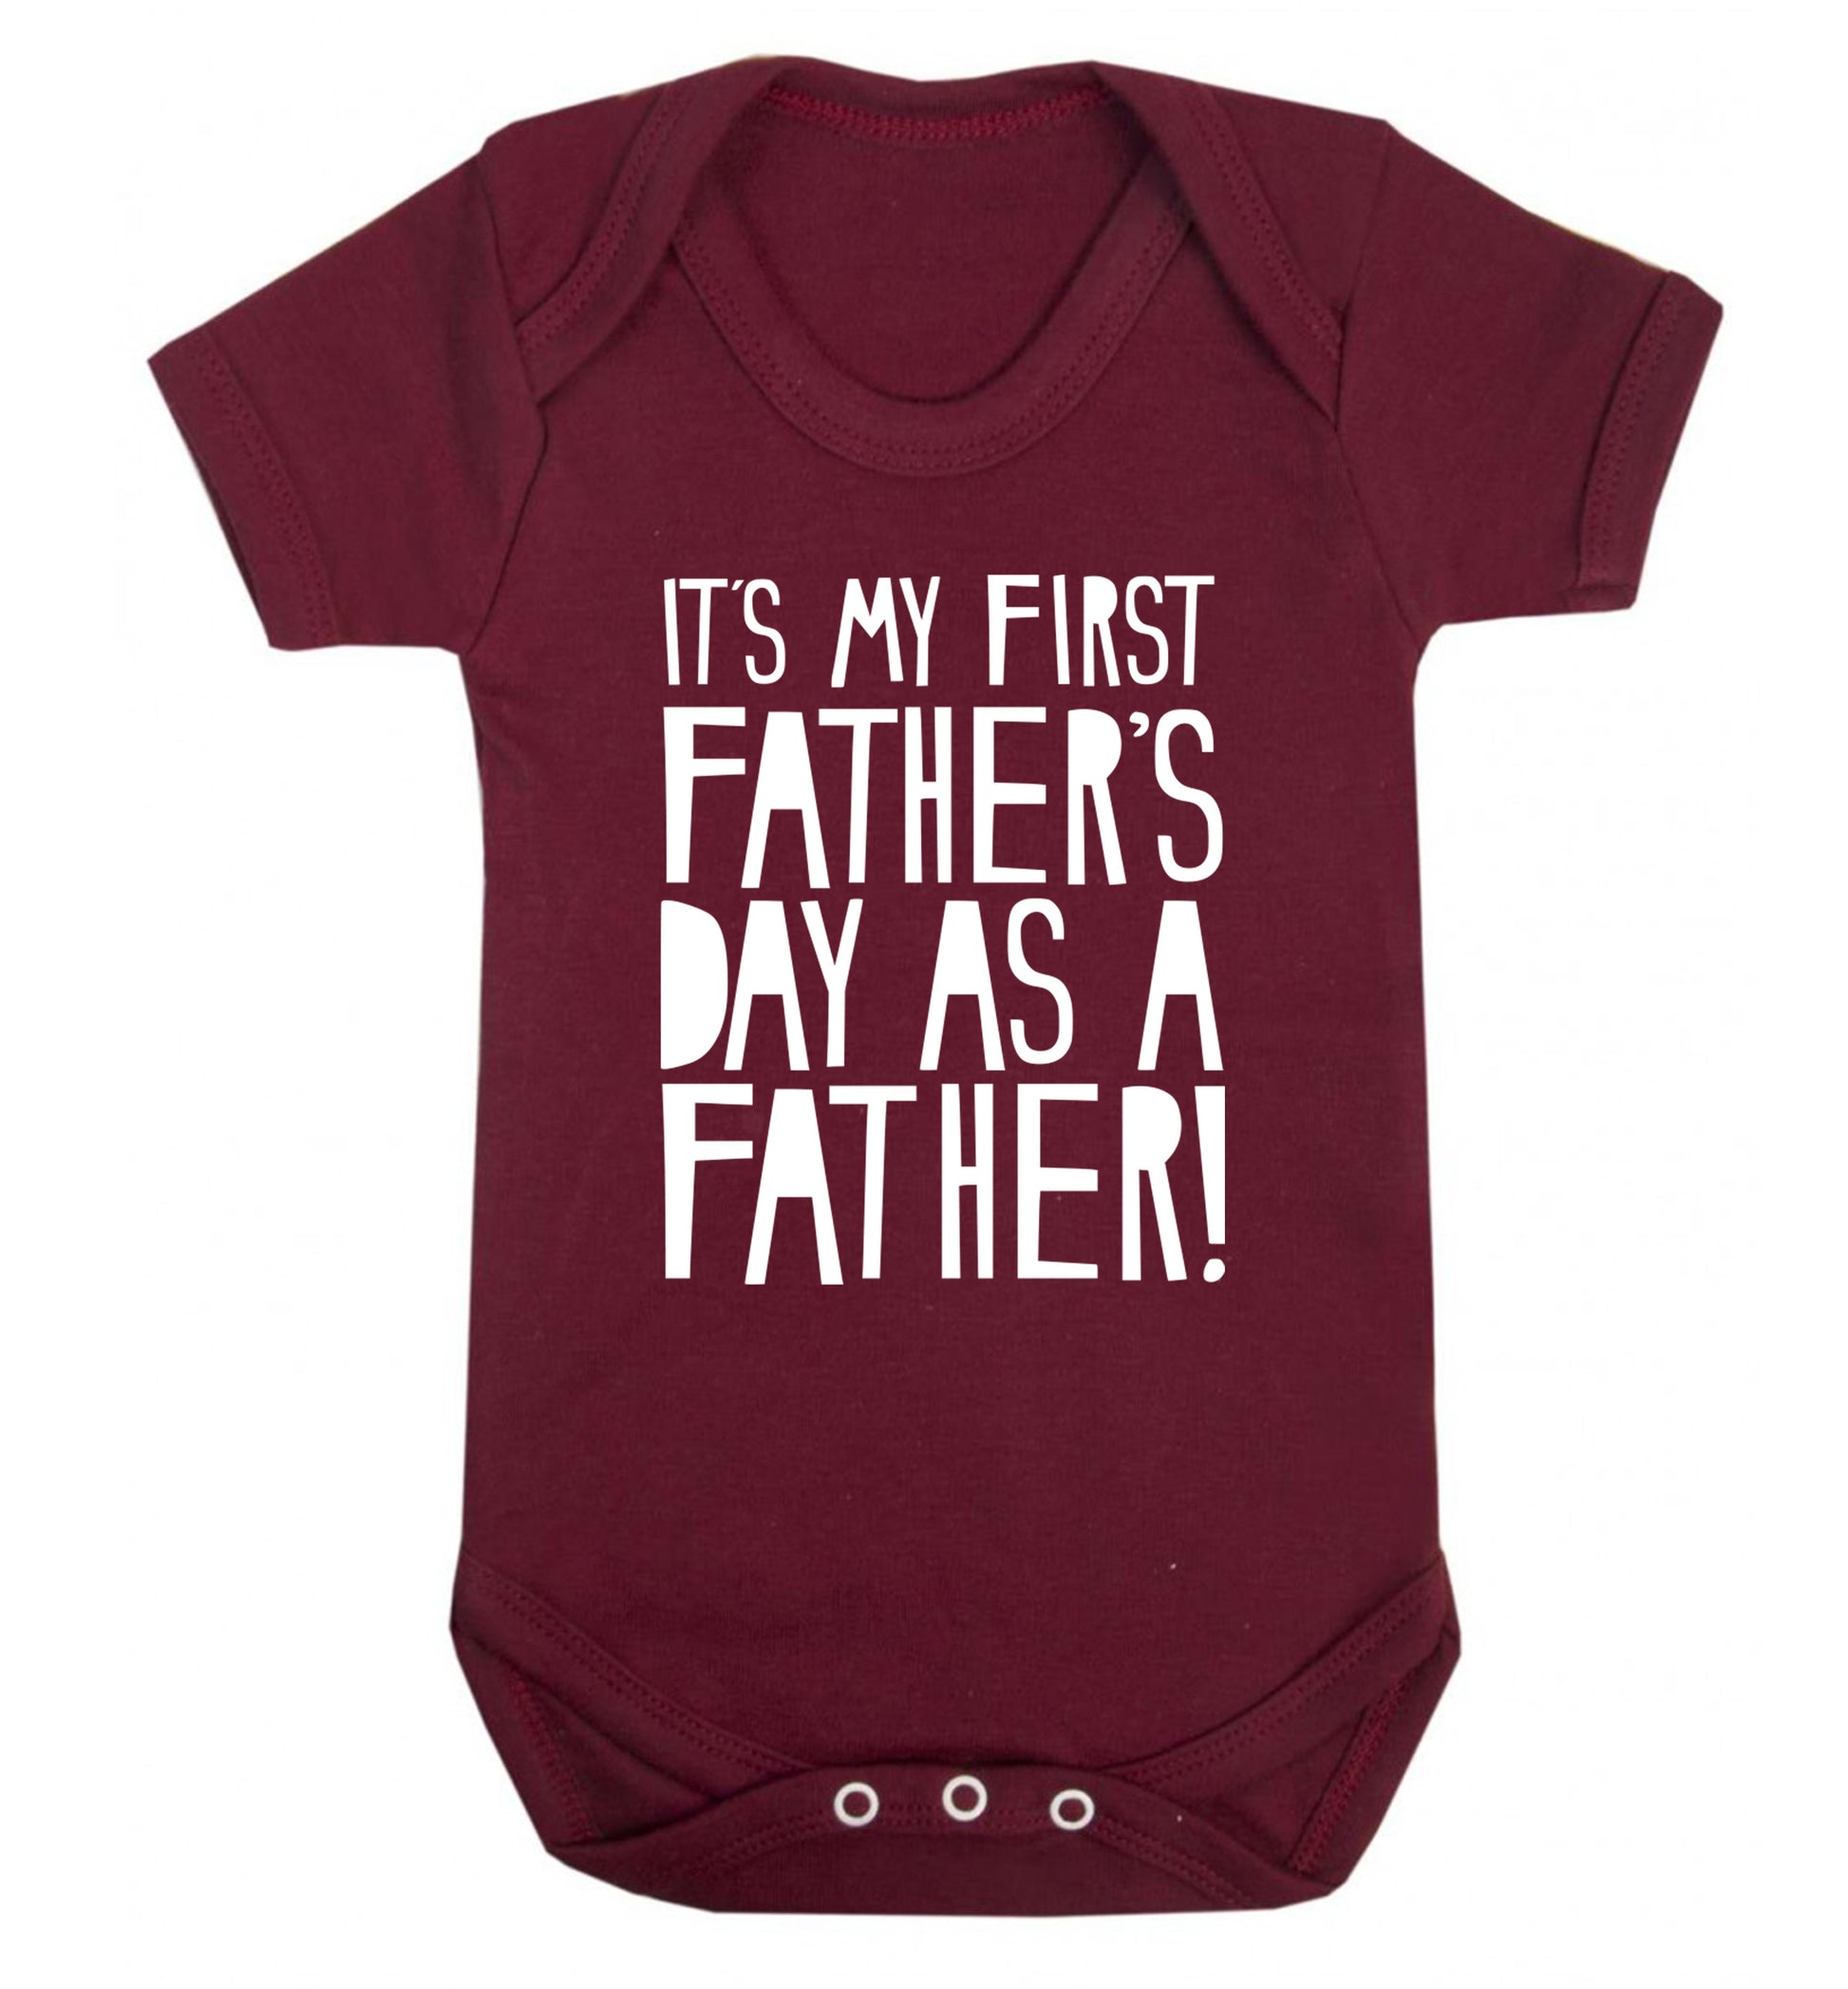 It's my first Father's Day as a father! Baby Vest maroon 18-24 months